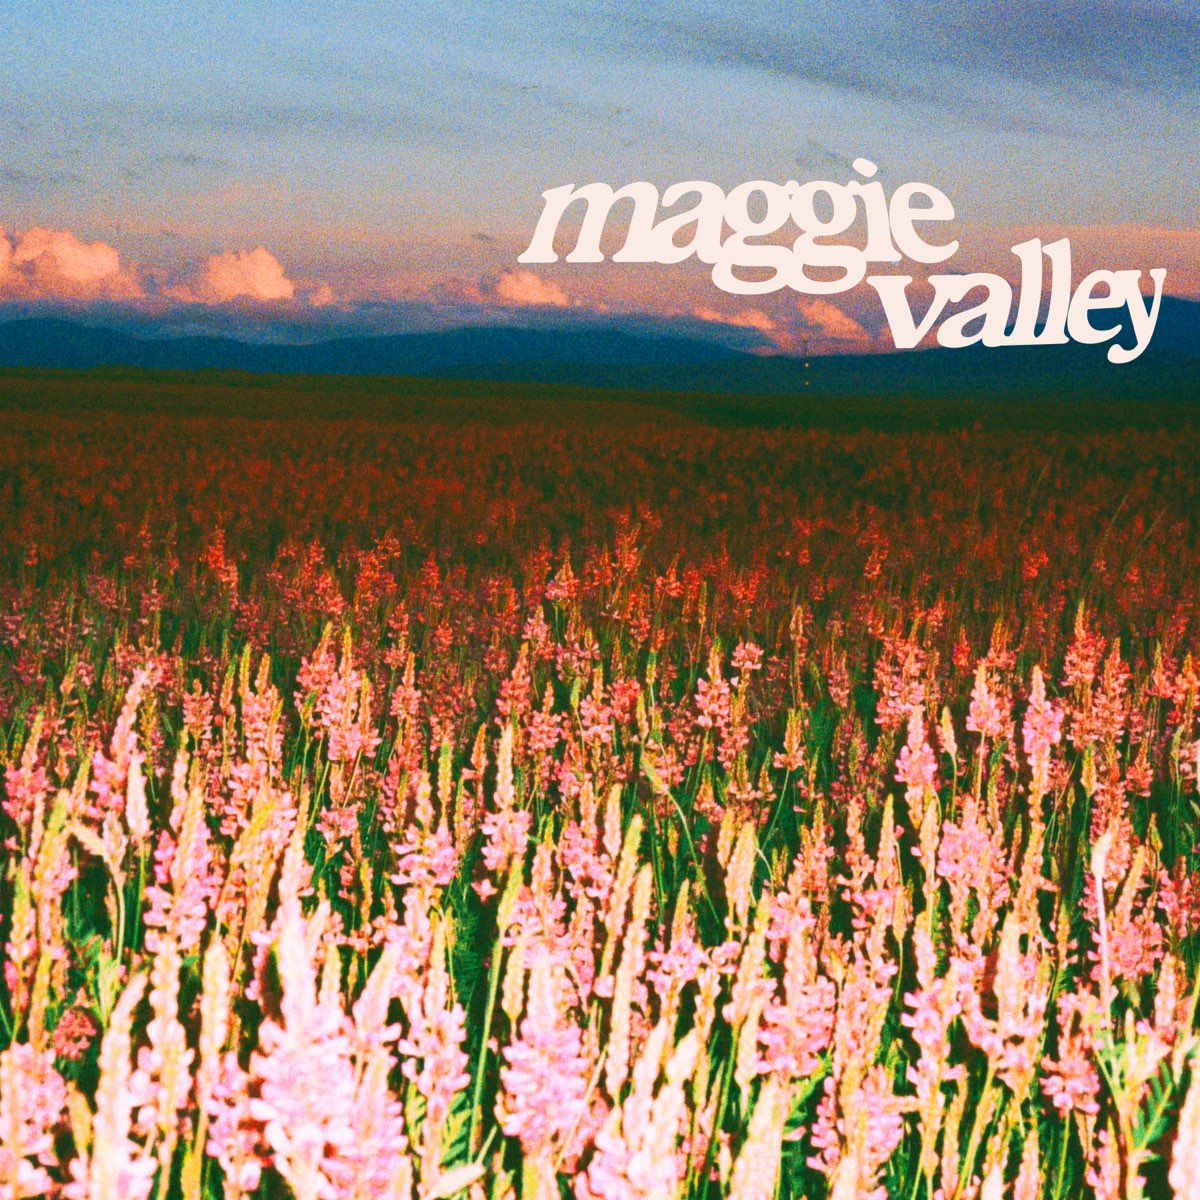 ‎Maggie Valley EP by Weston Estate on Apple Music